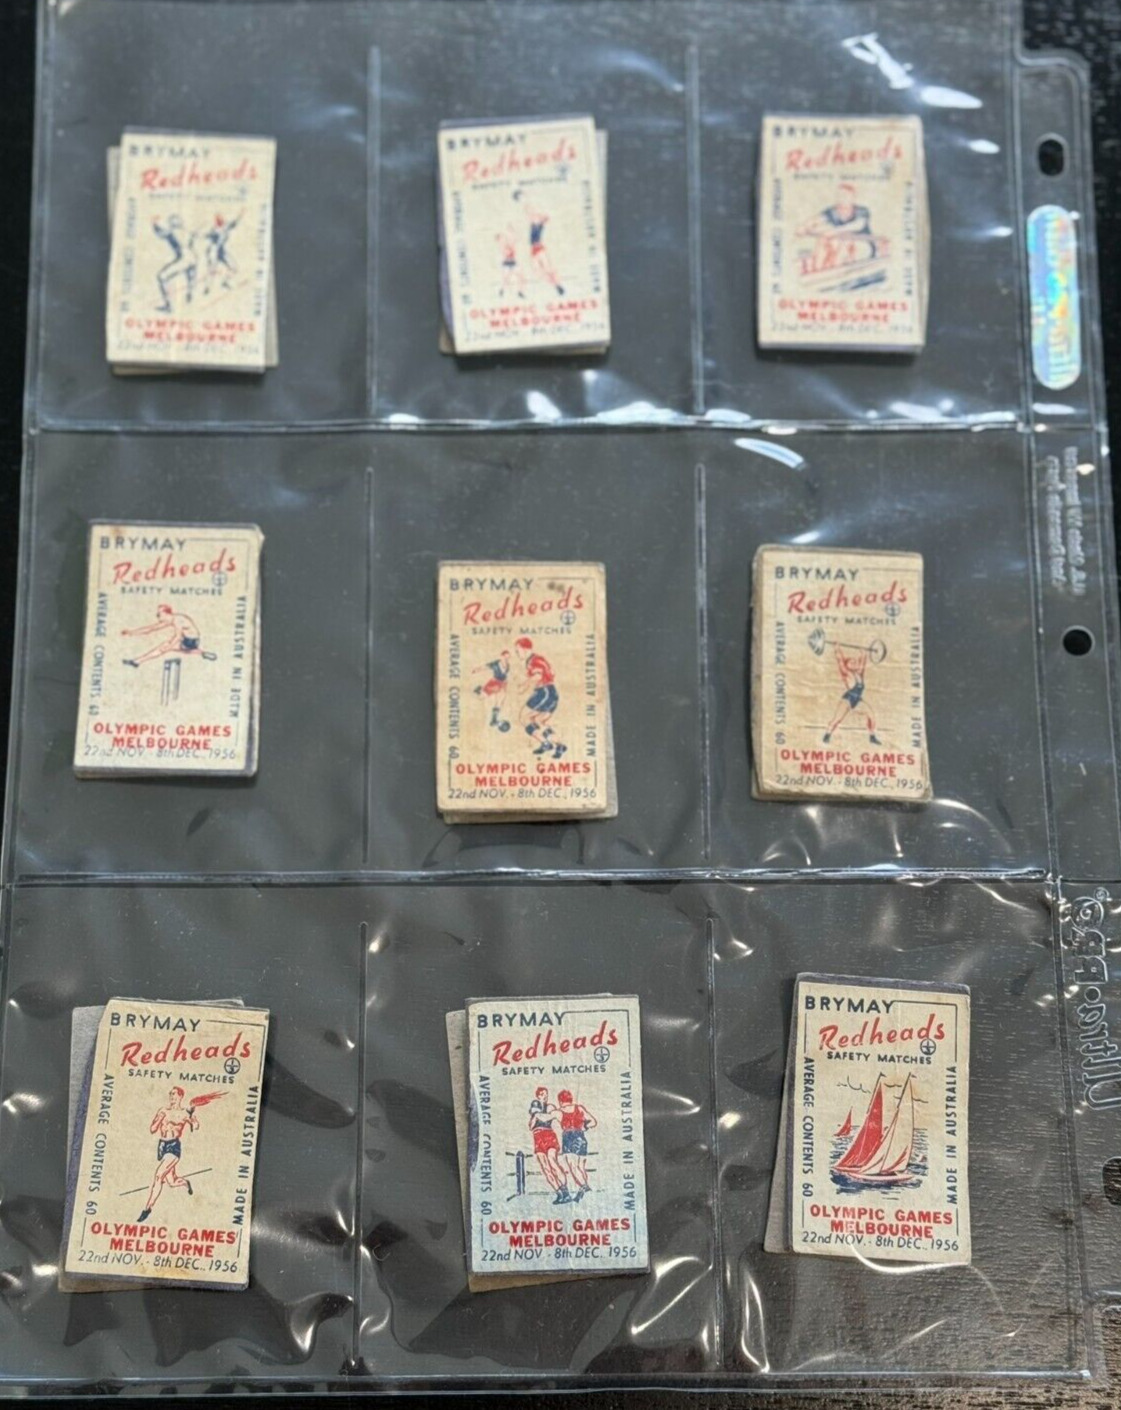 RARE Vintage 1956 Olympic Games Melbourne Brymay Redheads safety matches qty 18